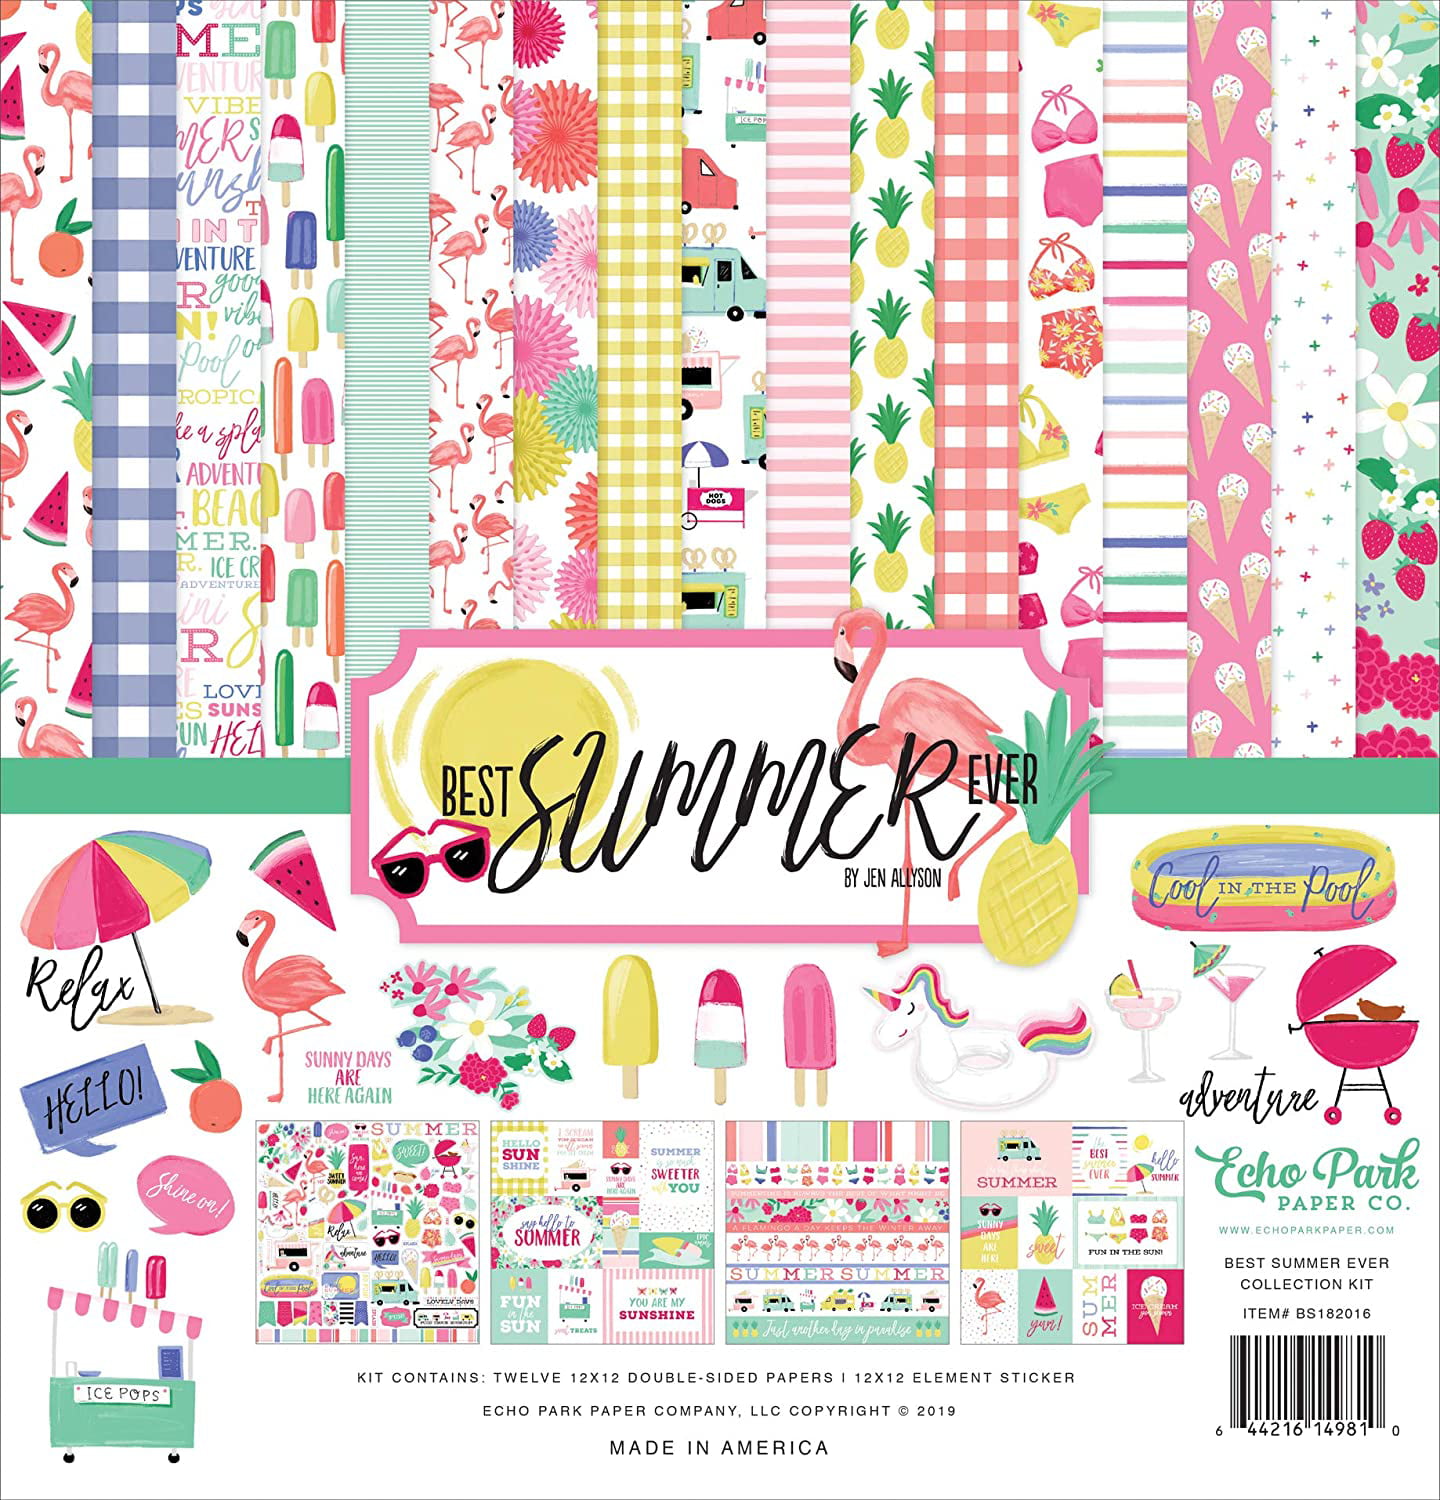 Teal Green Echo Park Paper Company SU178016 I Love Summer Collection Kit Paper Yellow Blue Pink red 